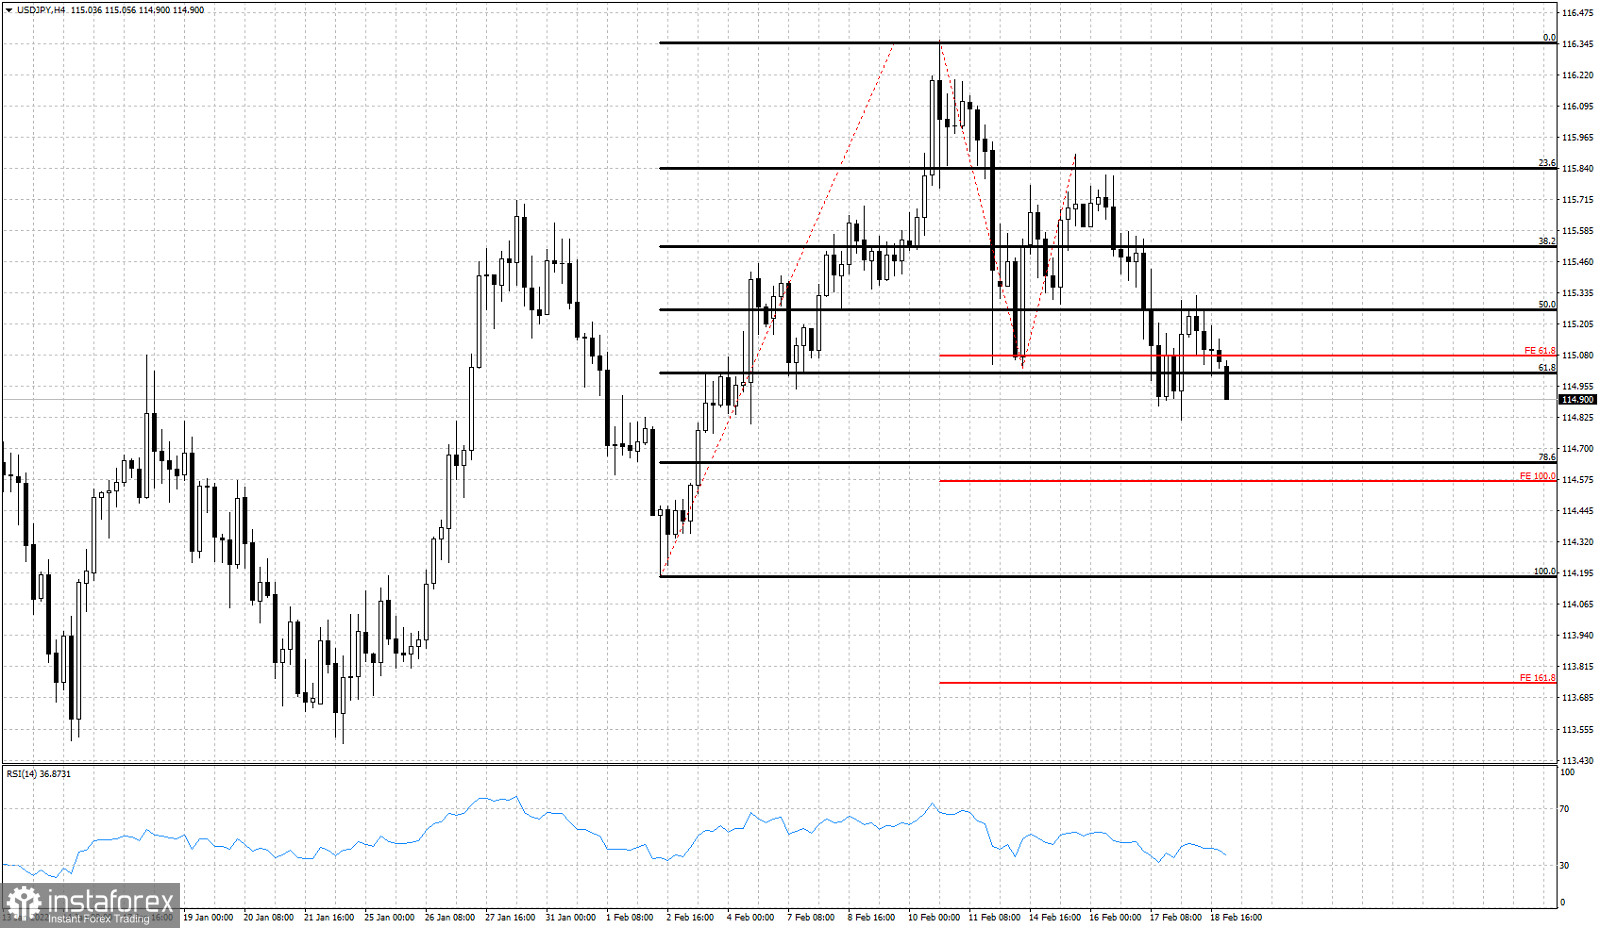 USDJPY to approach our second target early this week.